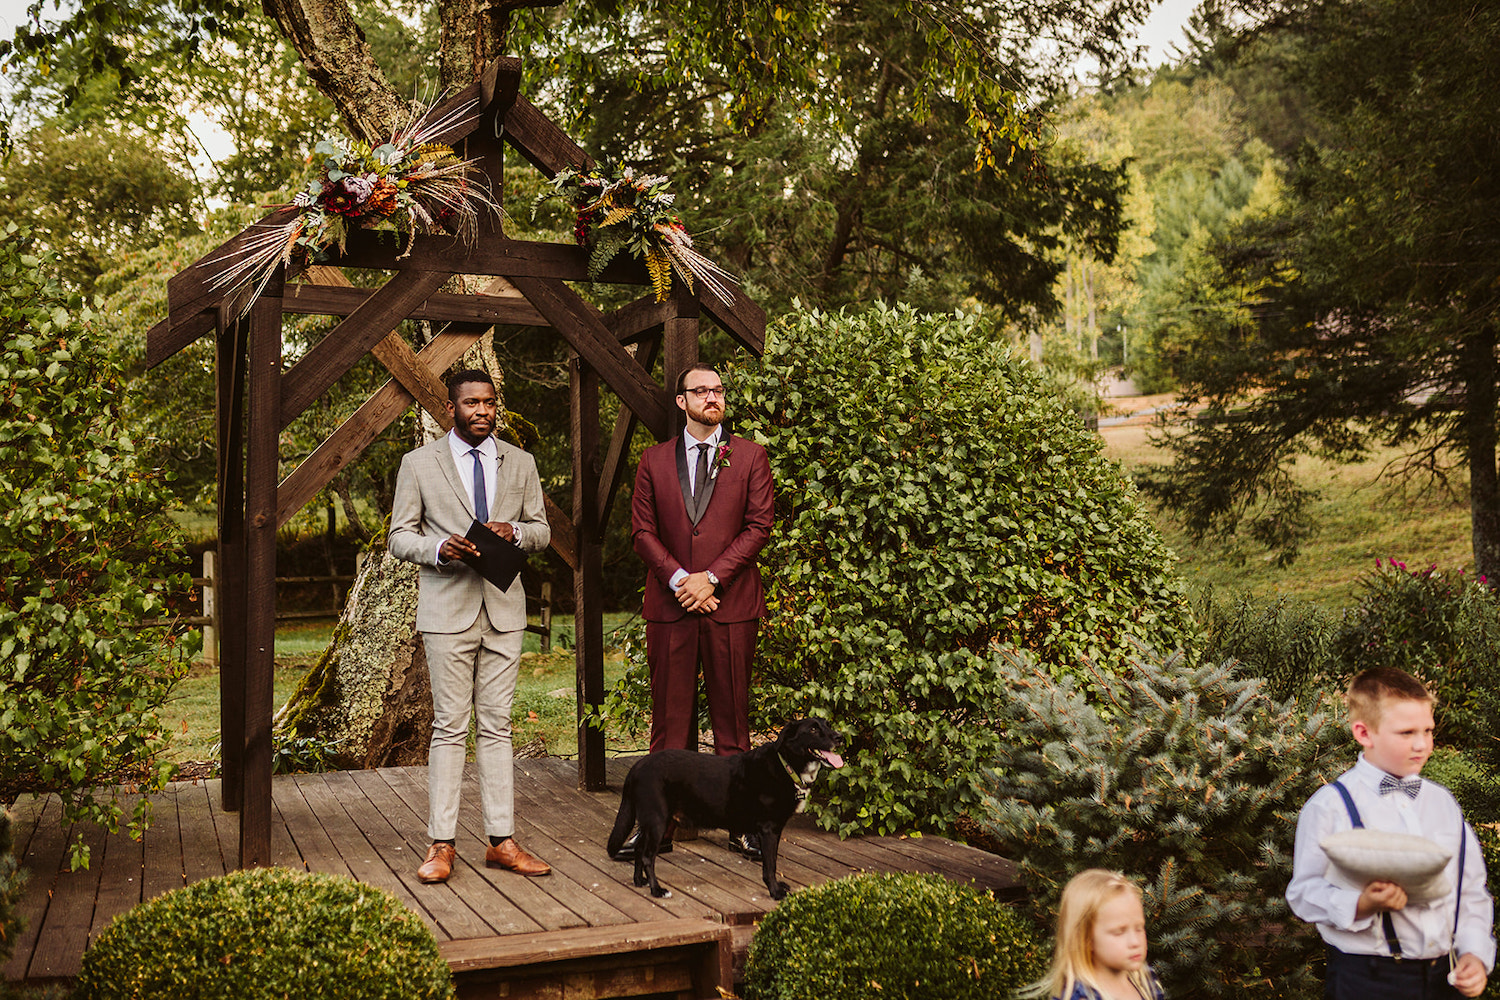 groom in maroon suit and officiant in tan suit stand on a wooden deck in front of a wooden archway